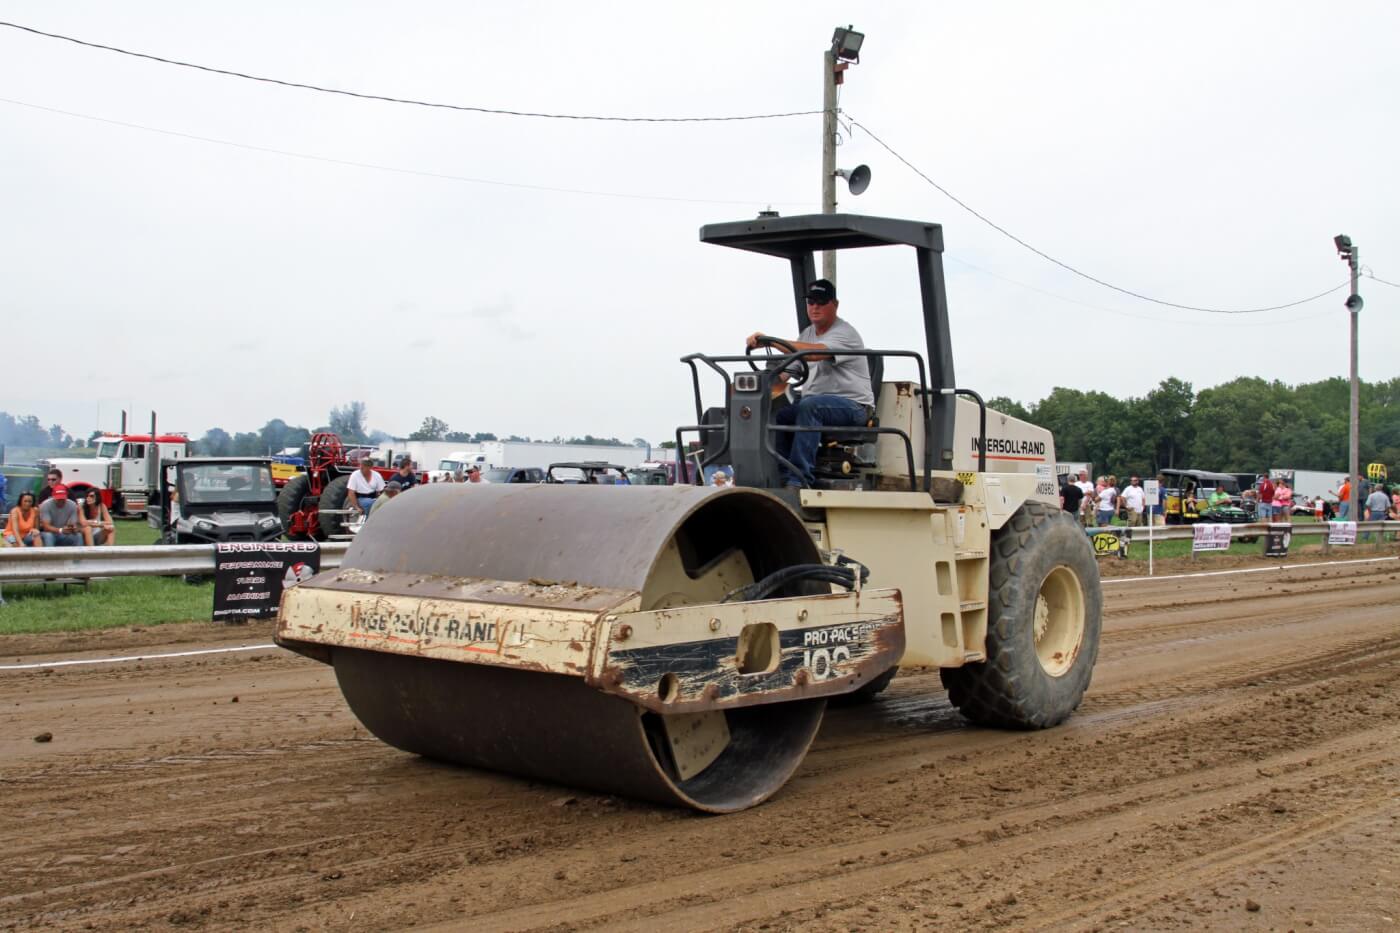 The track crew had some serious equipment on hand to prepare and maintain a great track surface that held up to hook after hook of high-horsepower abuse throughout the event.